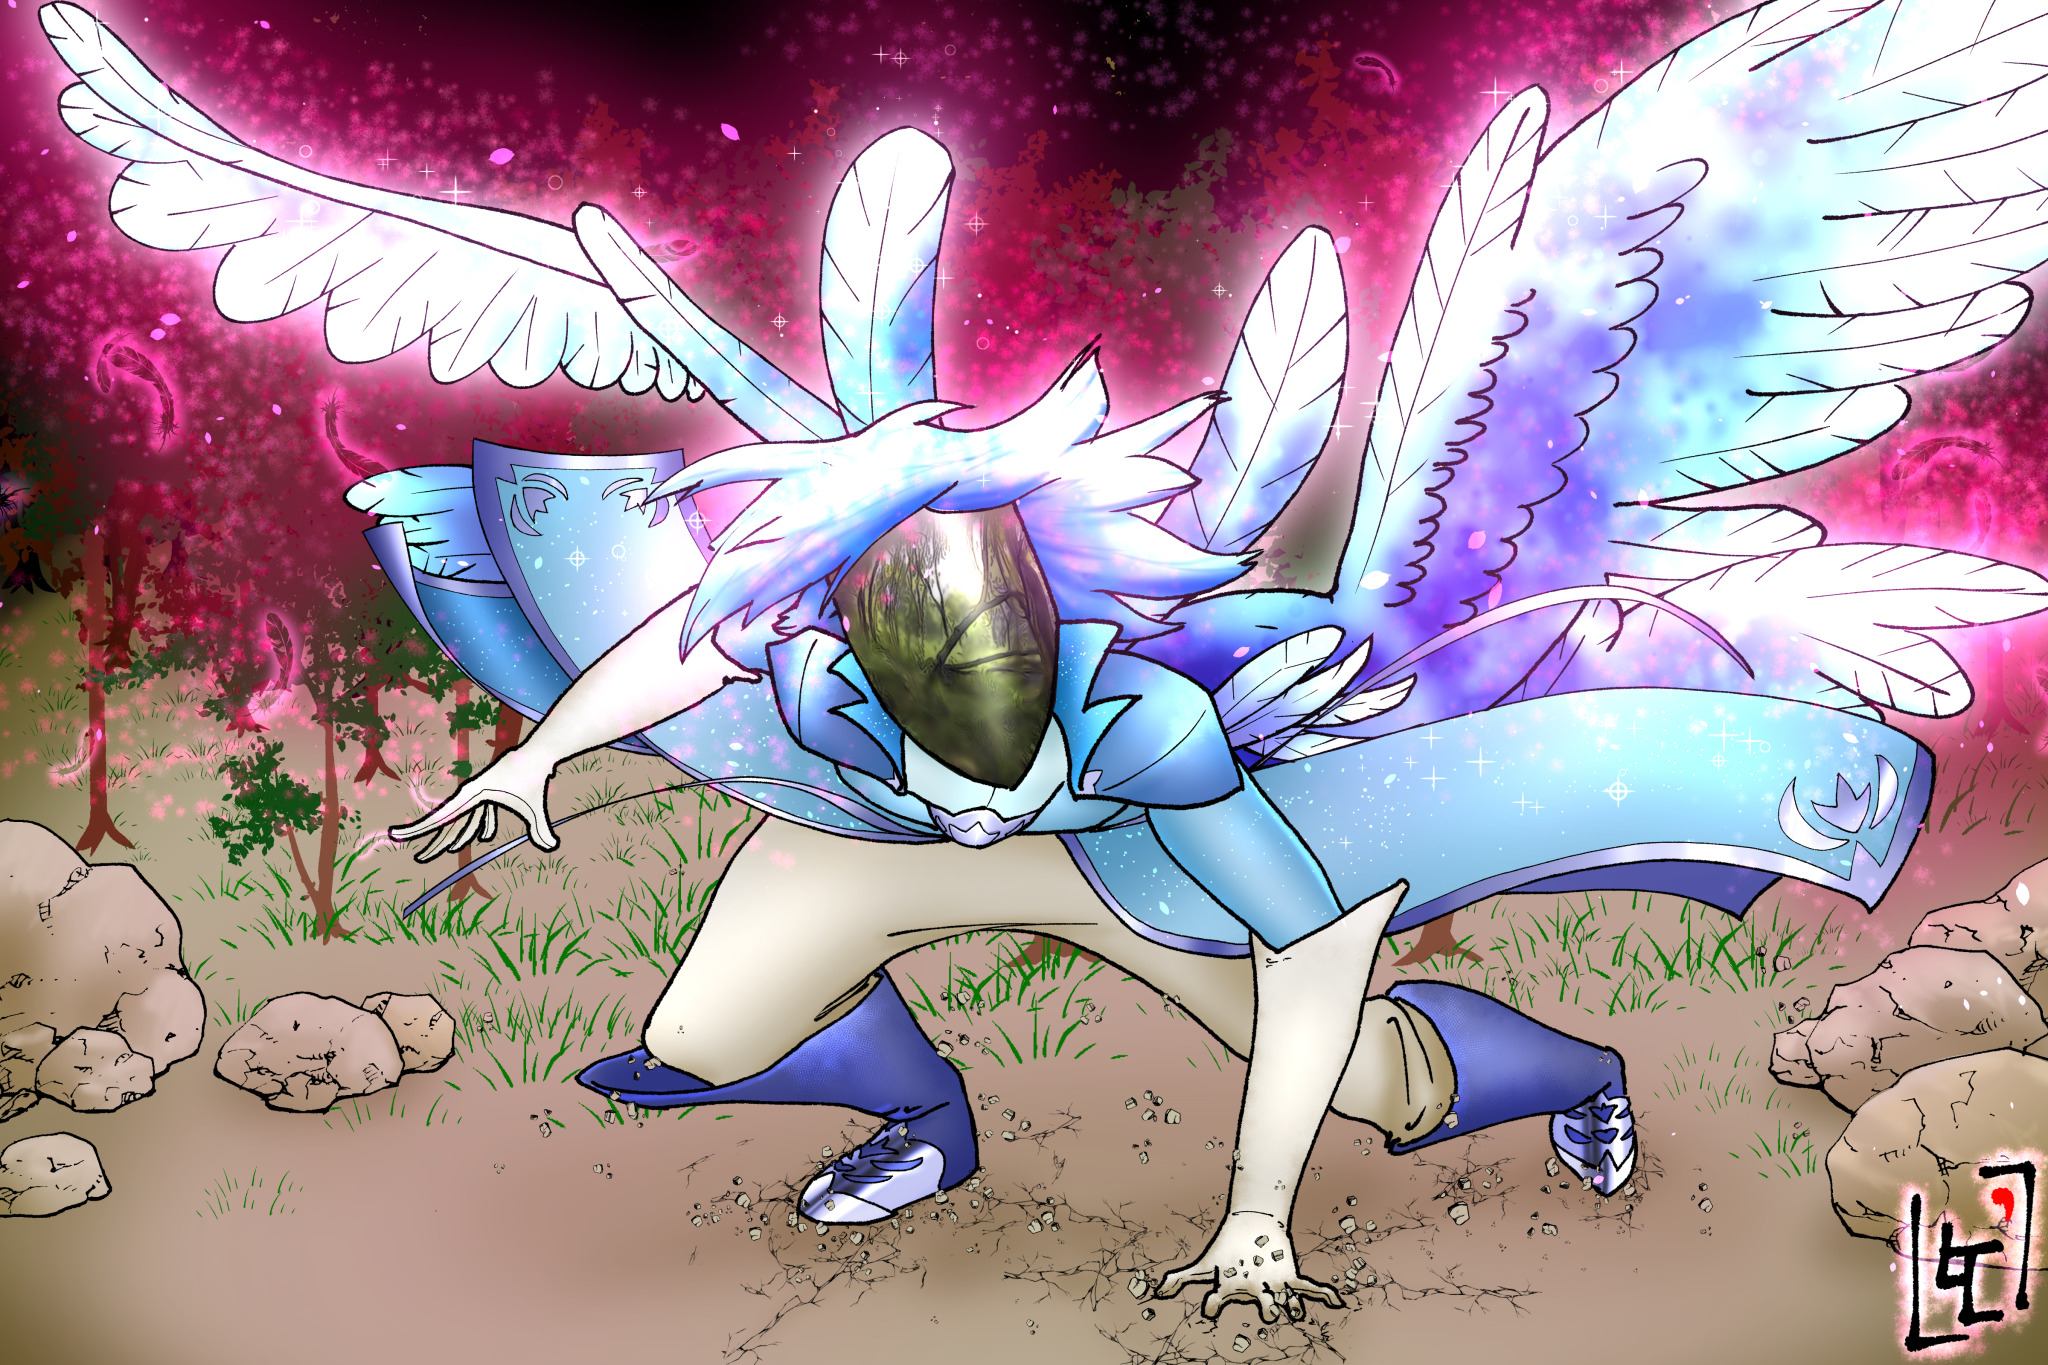 A humanoid person crouched in the forest, with large wings. The person is wearing a reflective mask. The art style in the reflection is realistic.